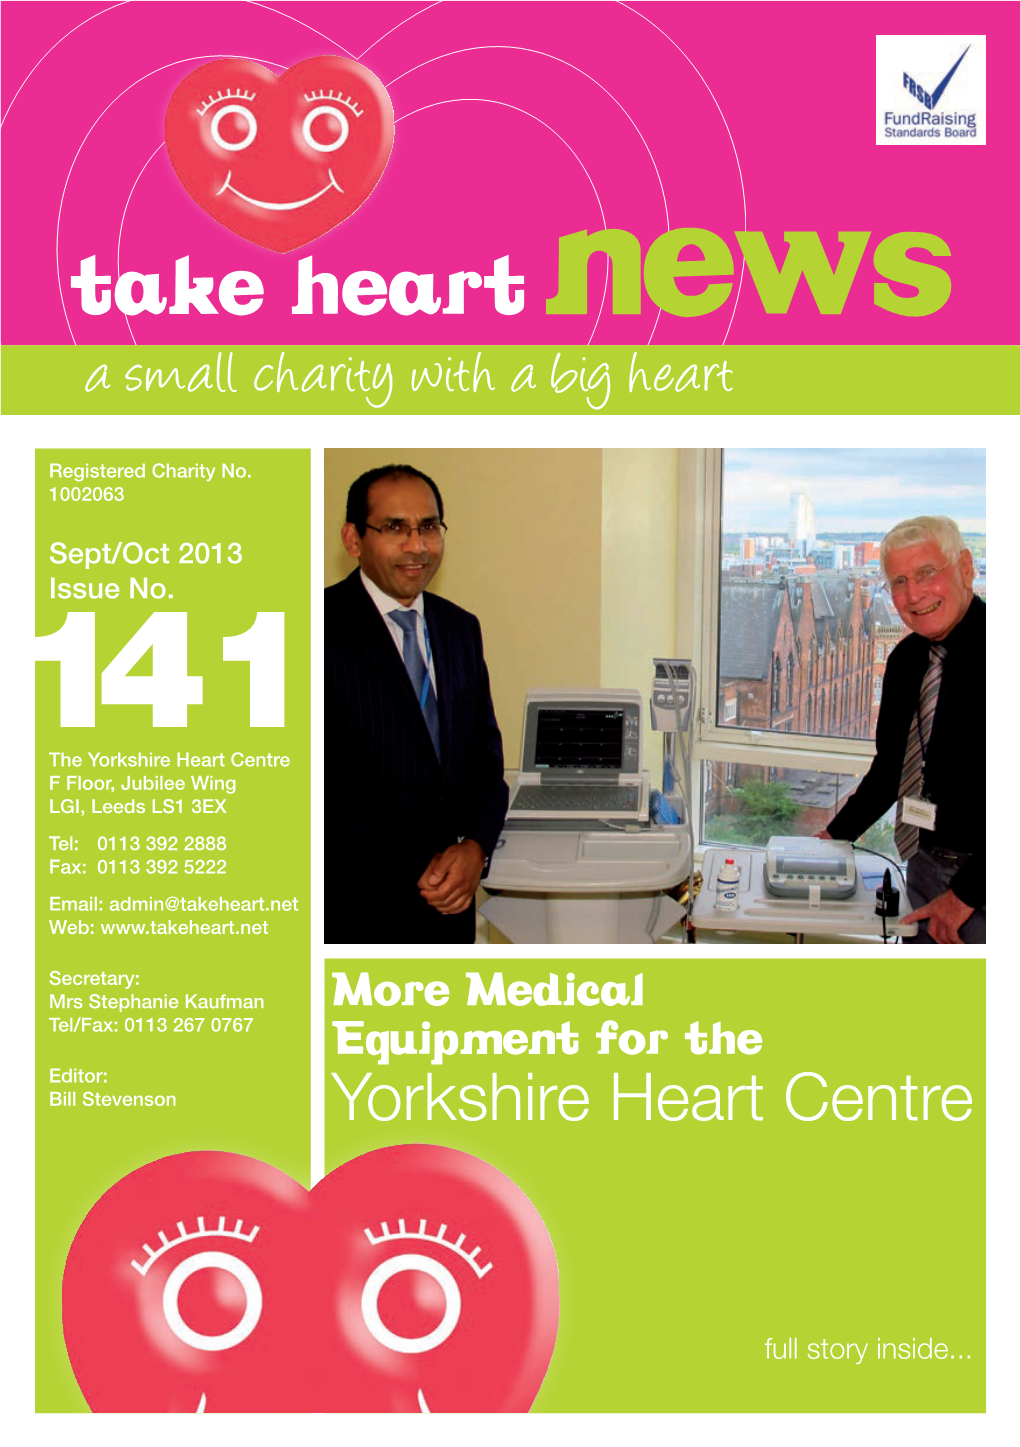 Take Heart News a Small Charity with a Big Heart